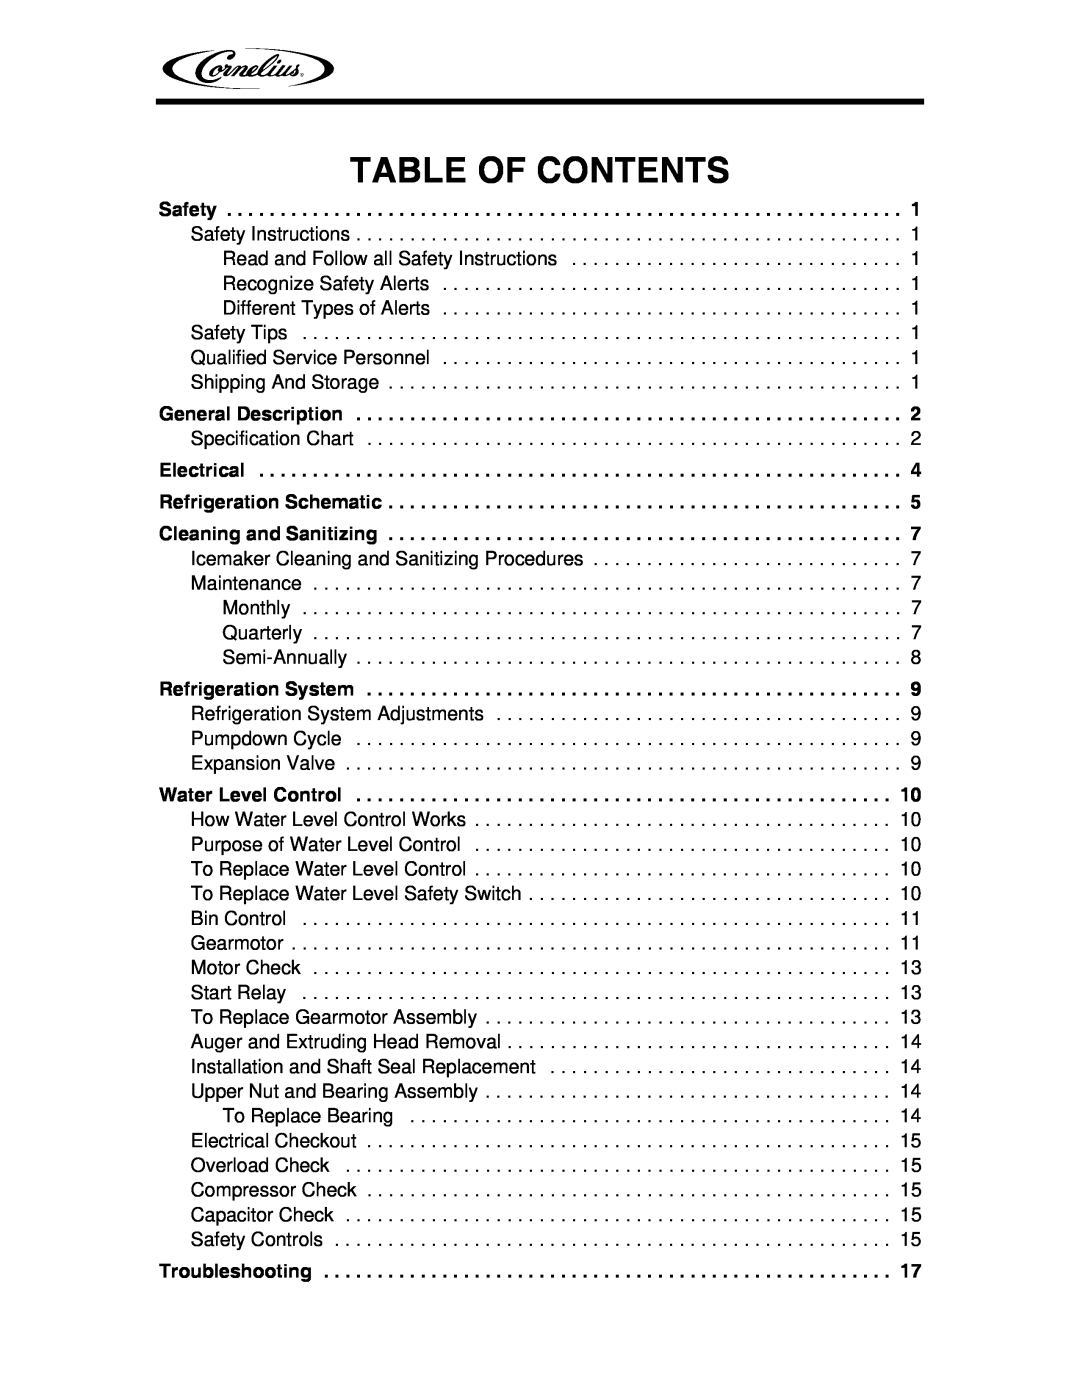 Cornelius WCC1401-A service manual Table Of Contents 